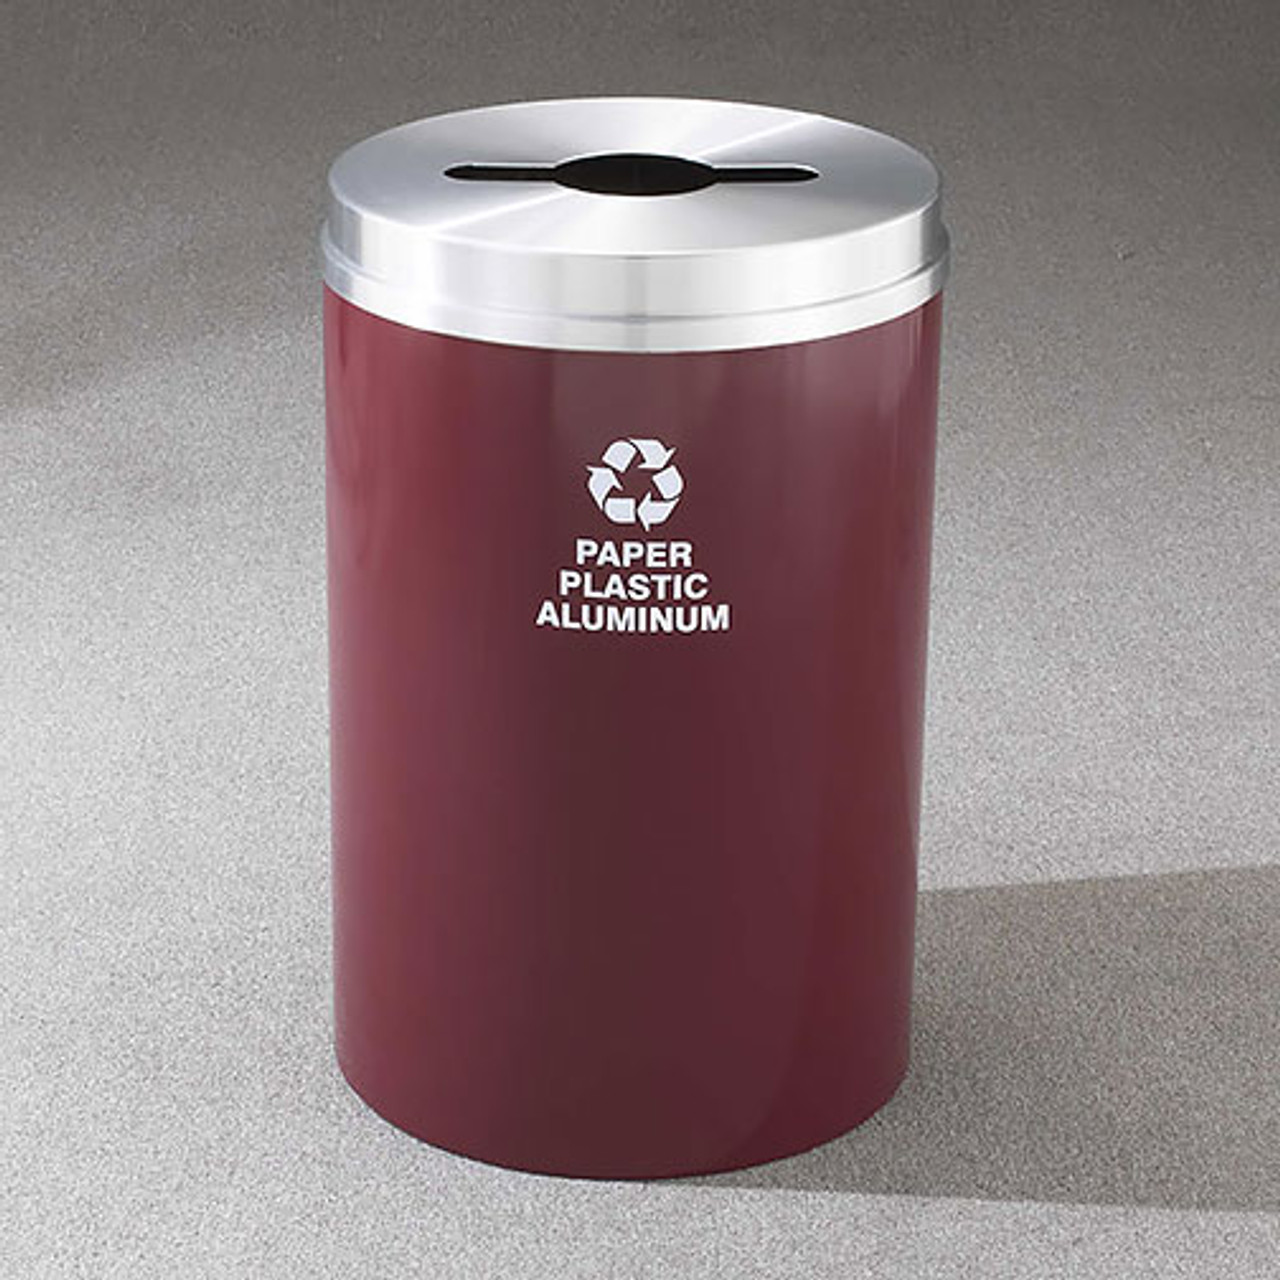 15 Gal. Round Galvanized Liner for Glaro Recycle Bins & Trash Cans